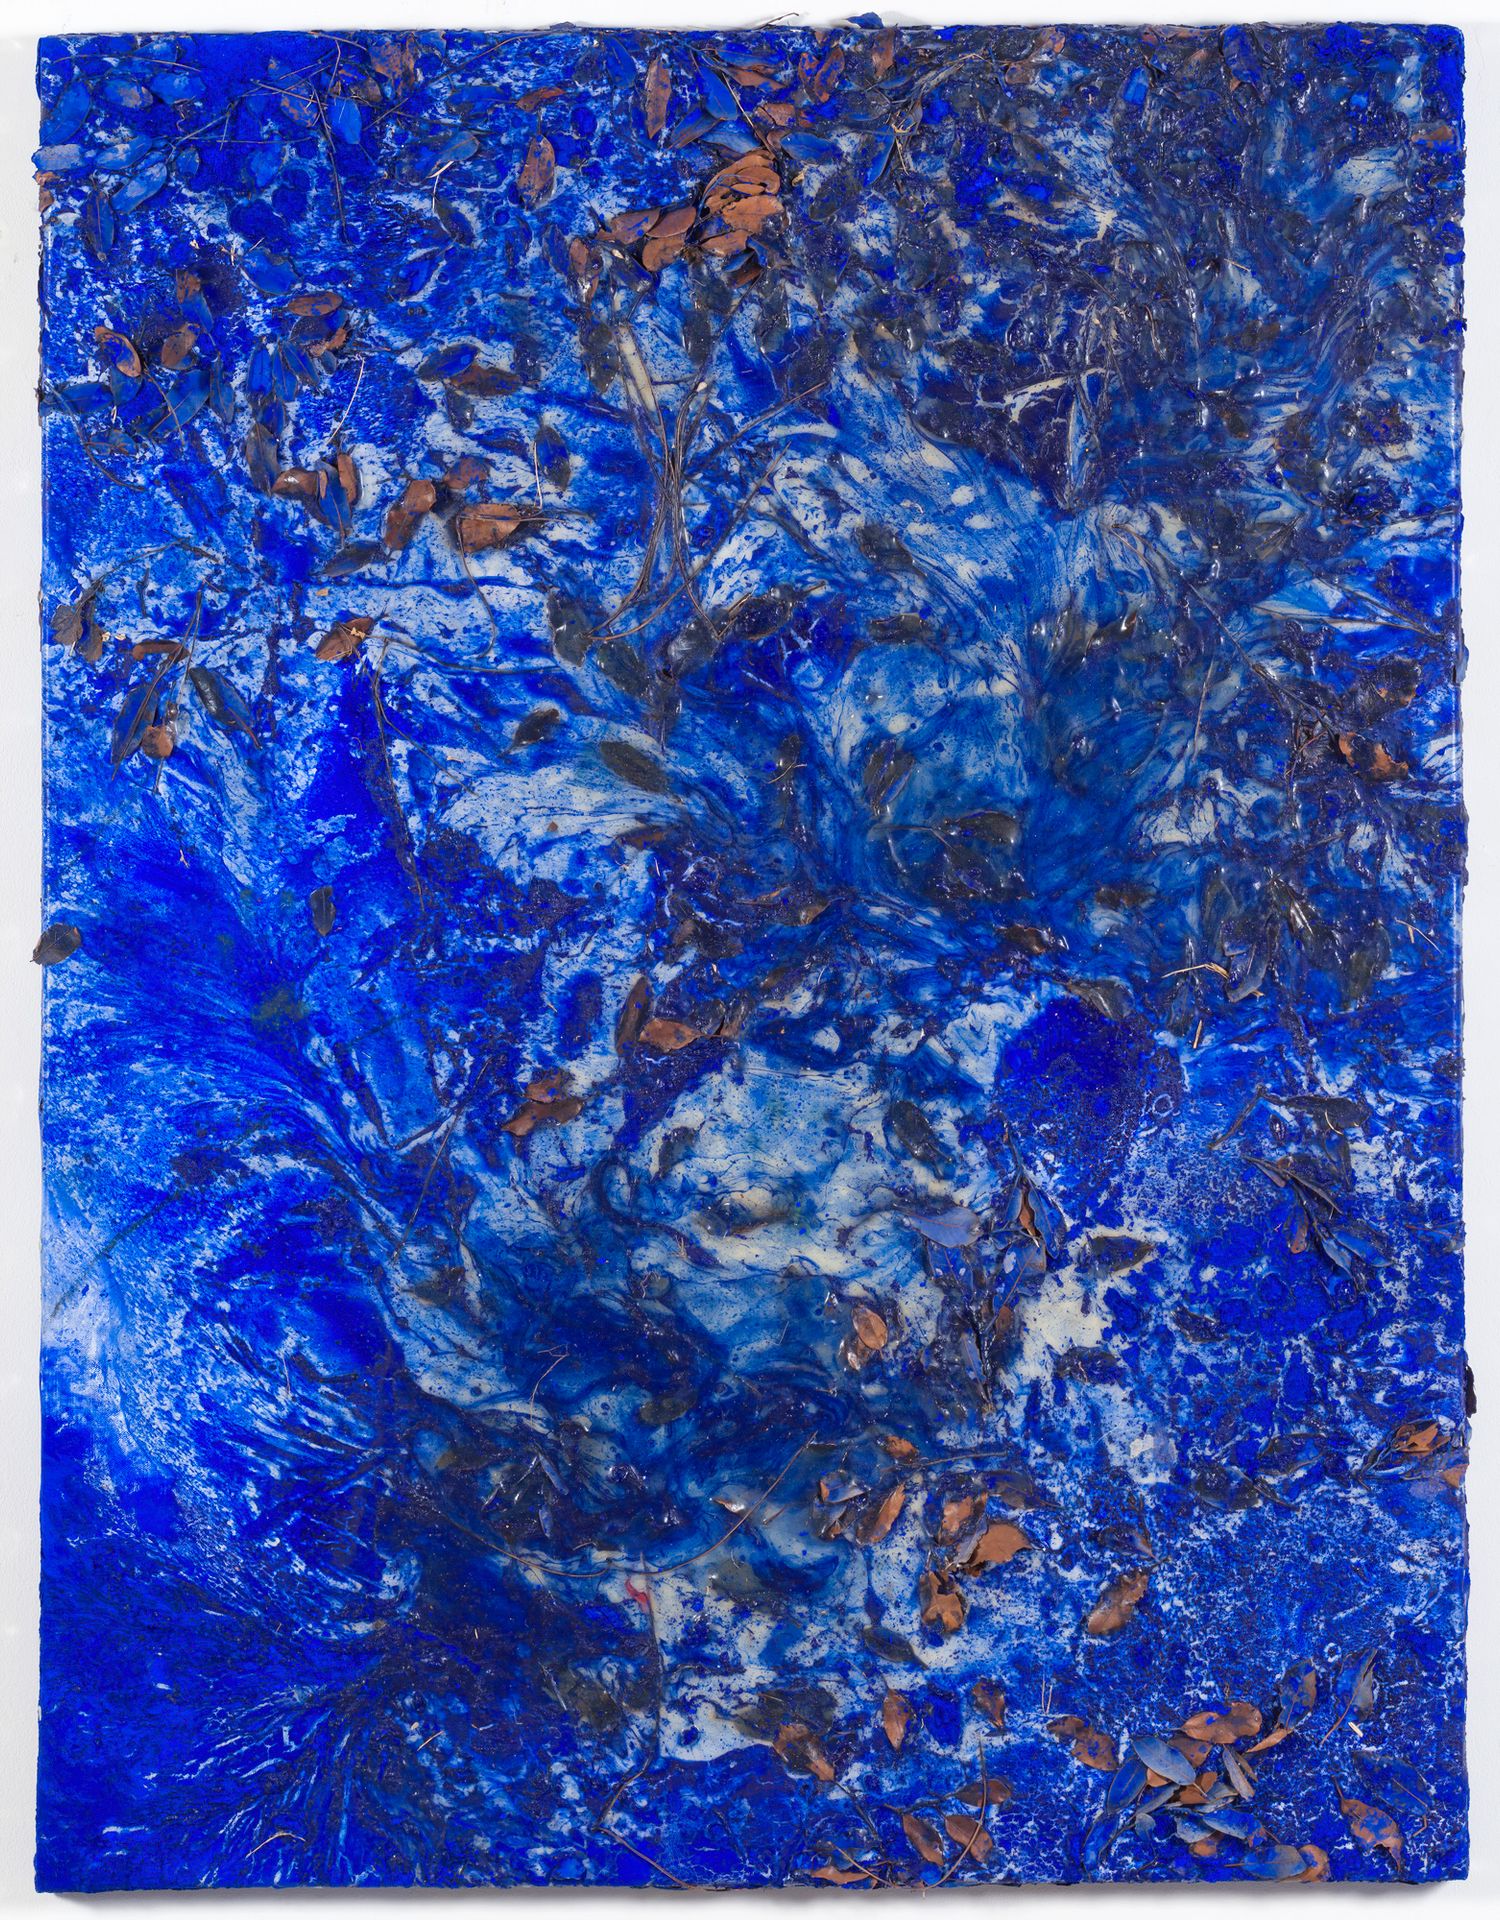 PHILIPPE PASTOR (né en 1961) AR 
Composition in blue 
2018

Leaves inlaid with b&hellip;